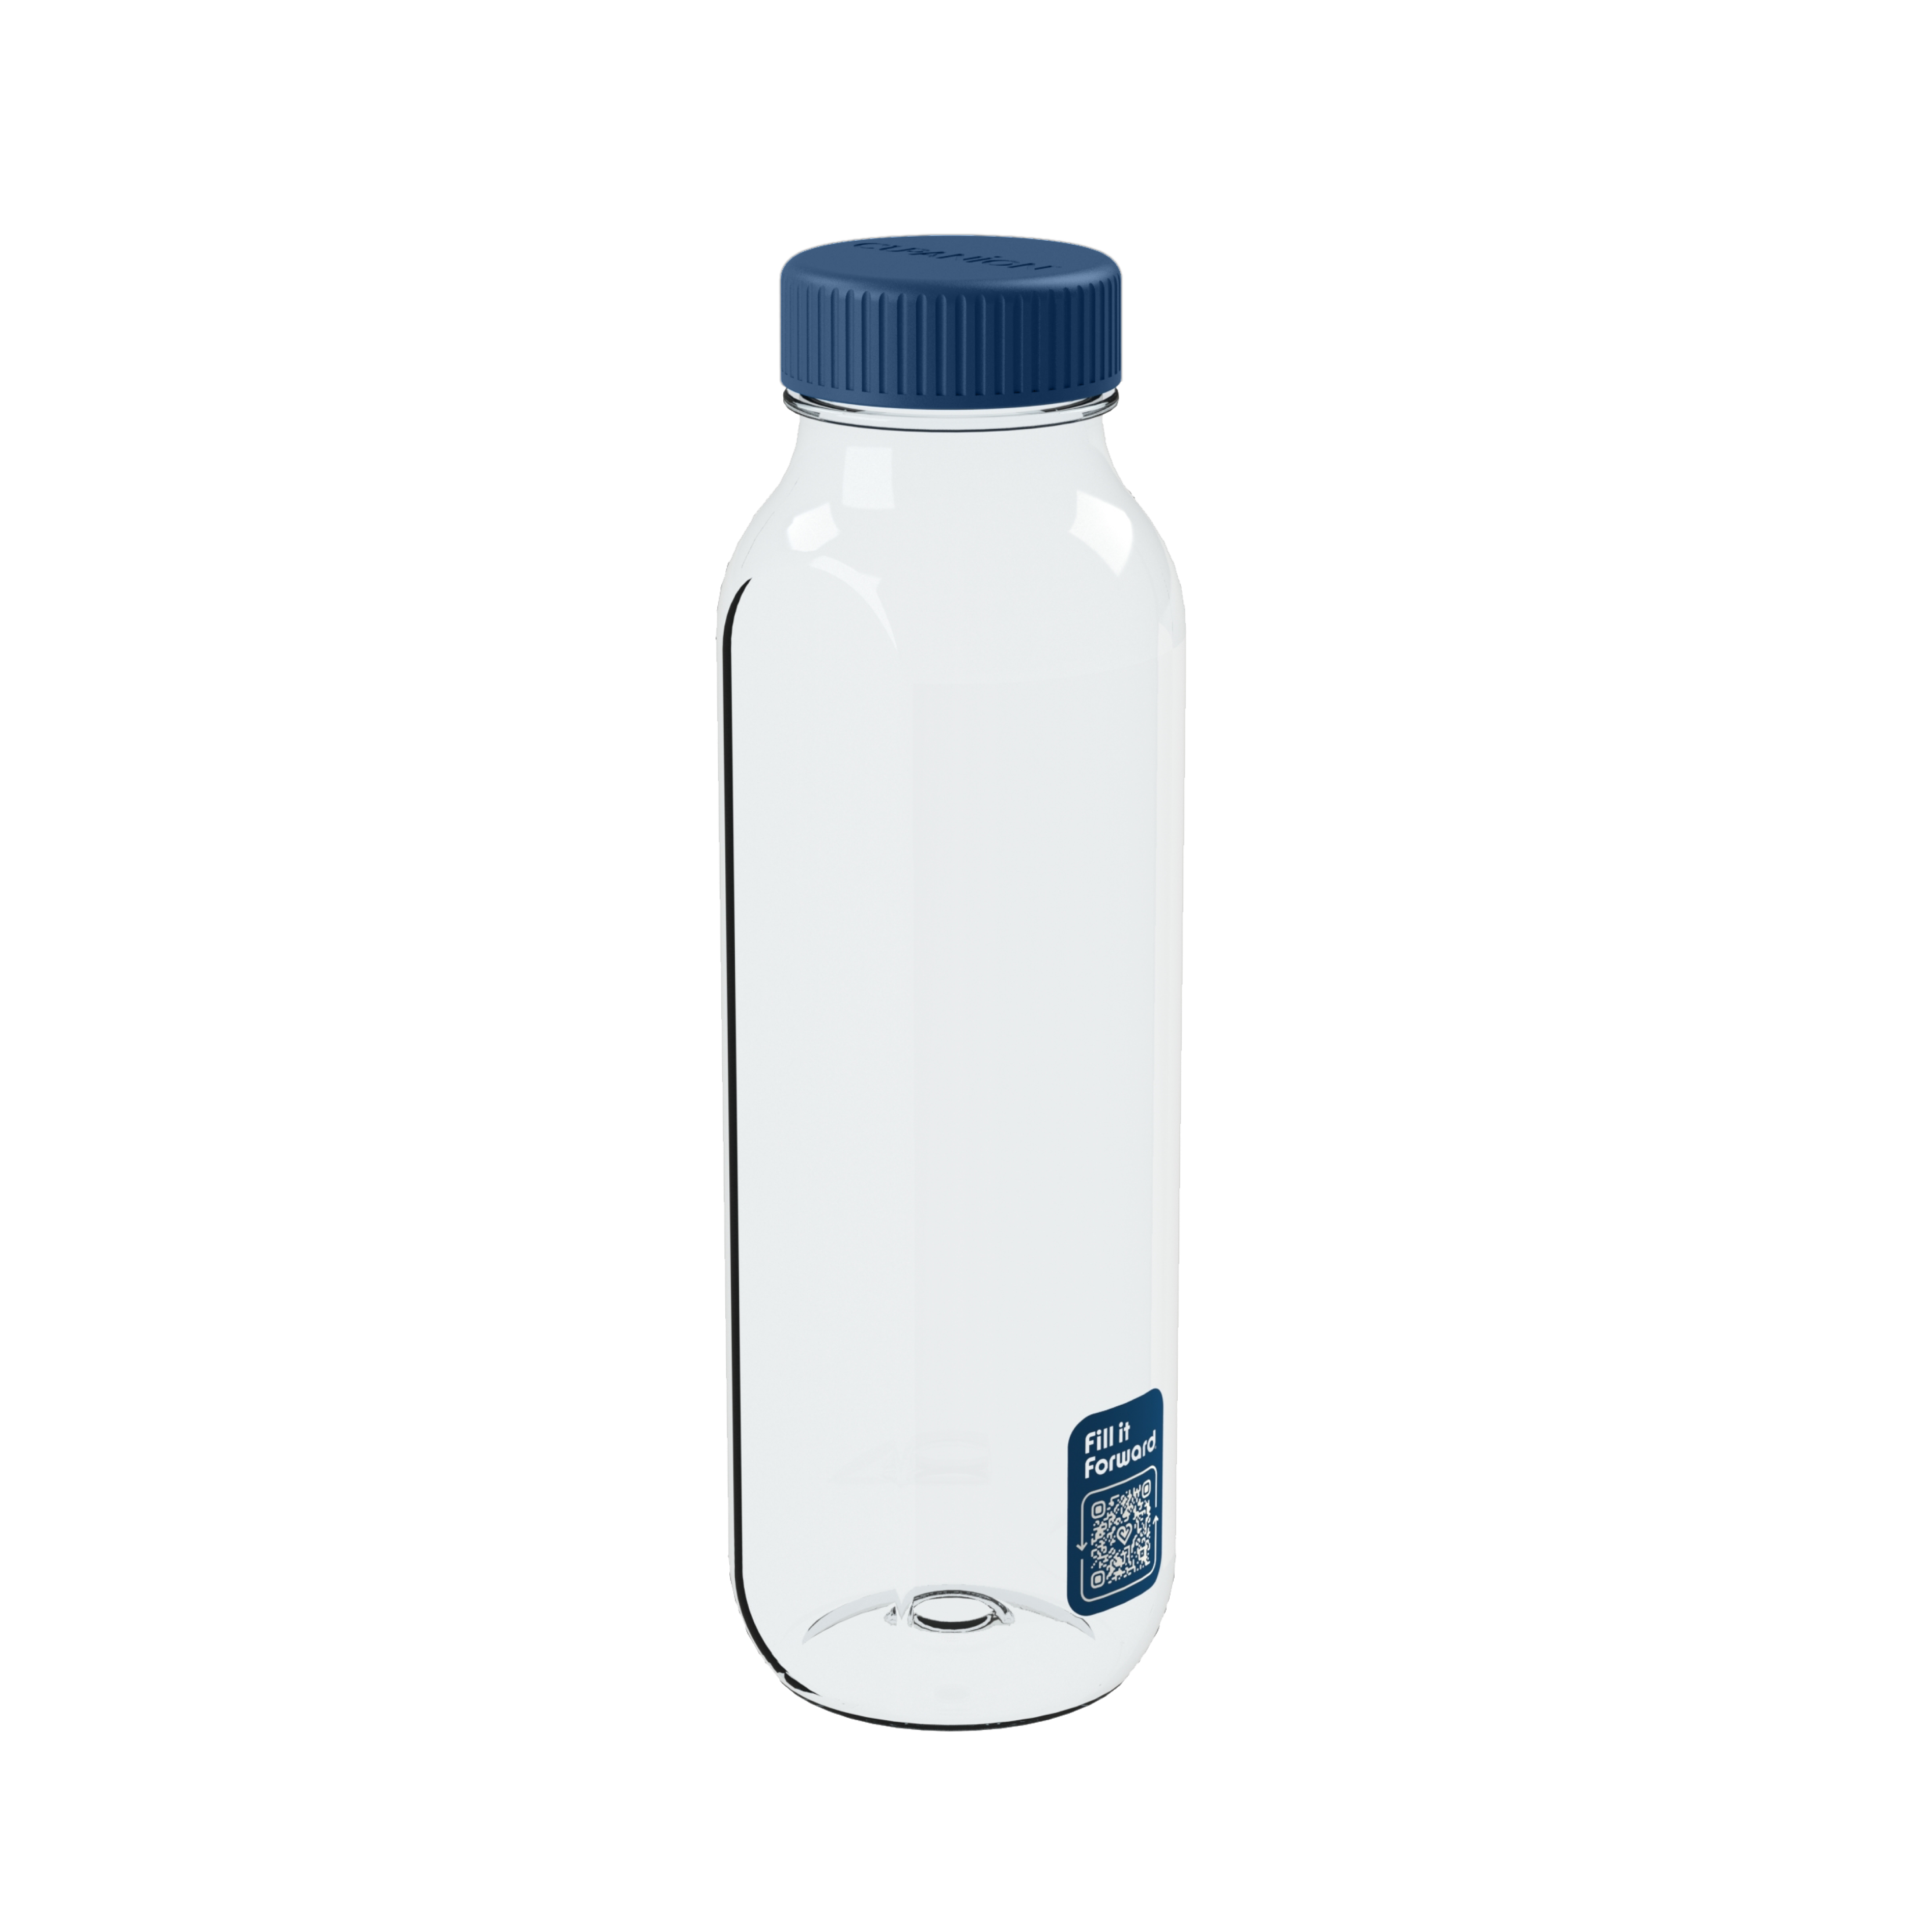 files/BOTTLE_MIDNIGHT_QR.png